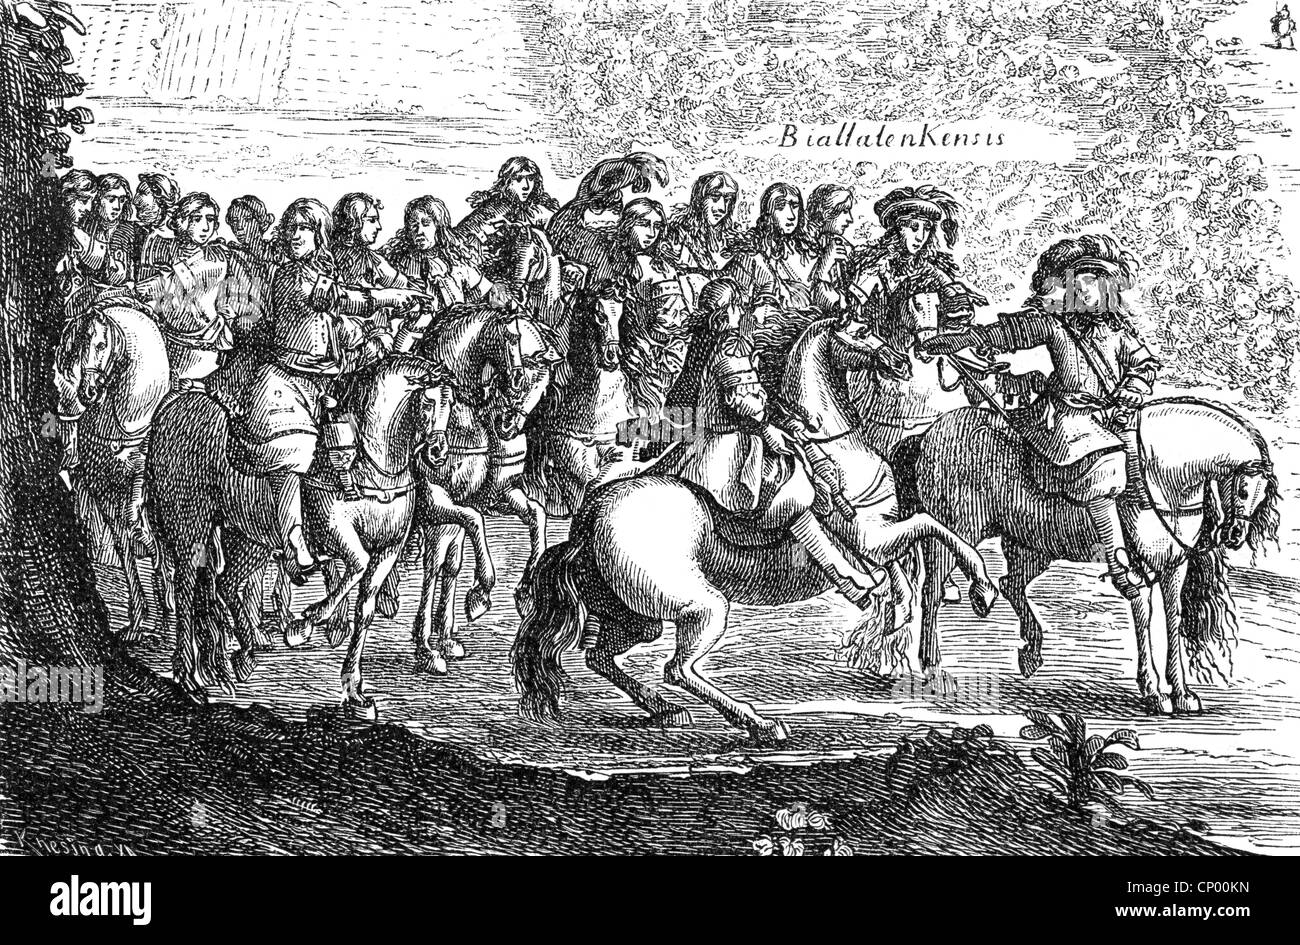 Charles  X Gustav, 8.11.1622 - 23 2.1660, King of Sweden 16.6.1654 - 23.2.1660, with Frederick William of Brandenburg in the Battle of Warsaw, 28.- 30.7.1656, etching after drawing by E. J. Dahlberg, 'De rebus a Carolo Gustavo gestis' by Samuel von Pufendorf, Nuremberg, 1696, , Stock Photo